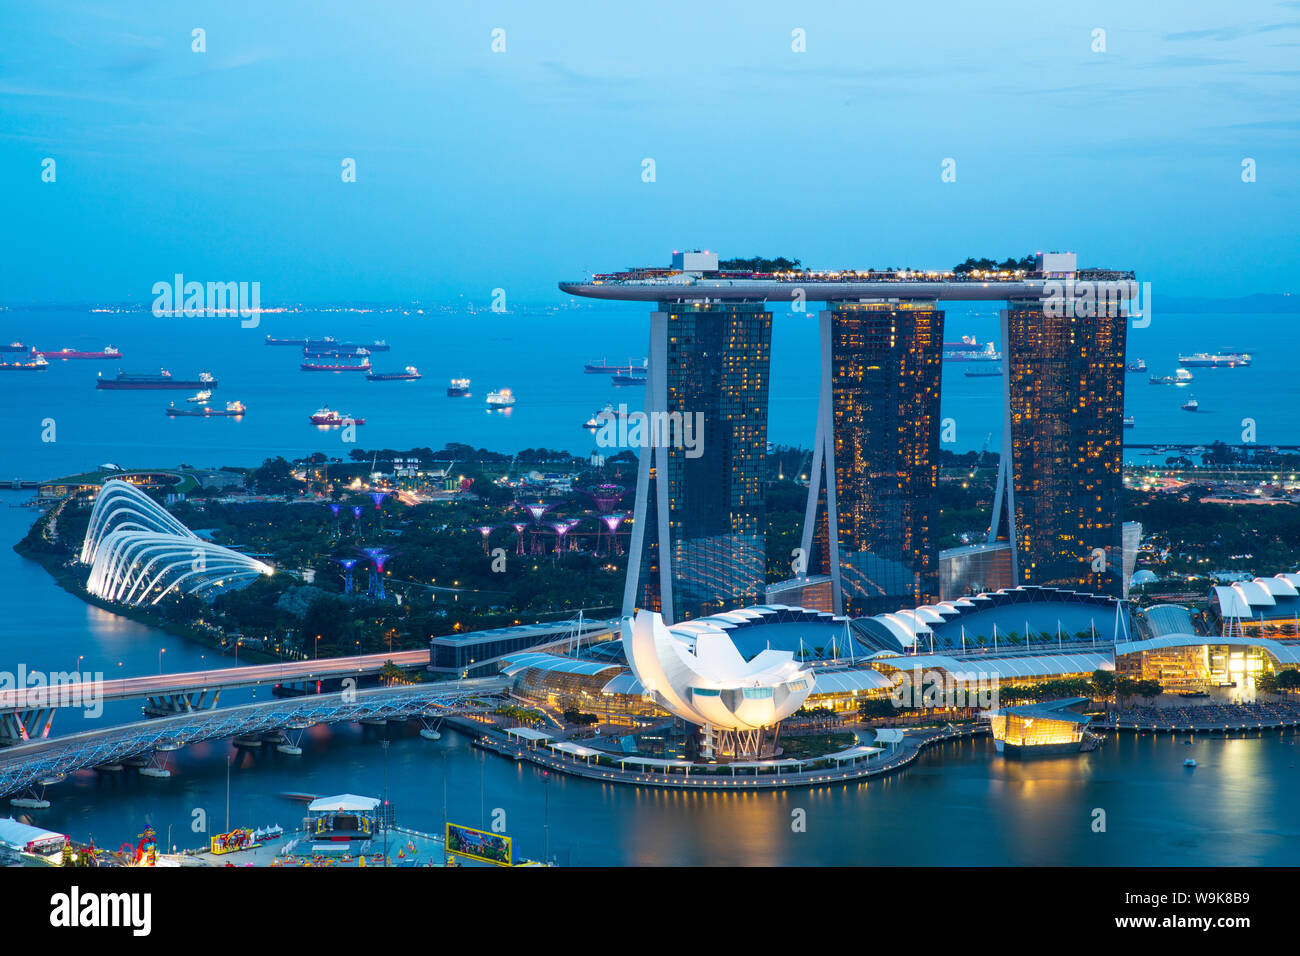 Marina Bay Sands Hotel and Gardens by the Bay, Singapore, Southeast Asia, Asia Stock Photo